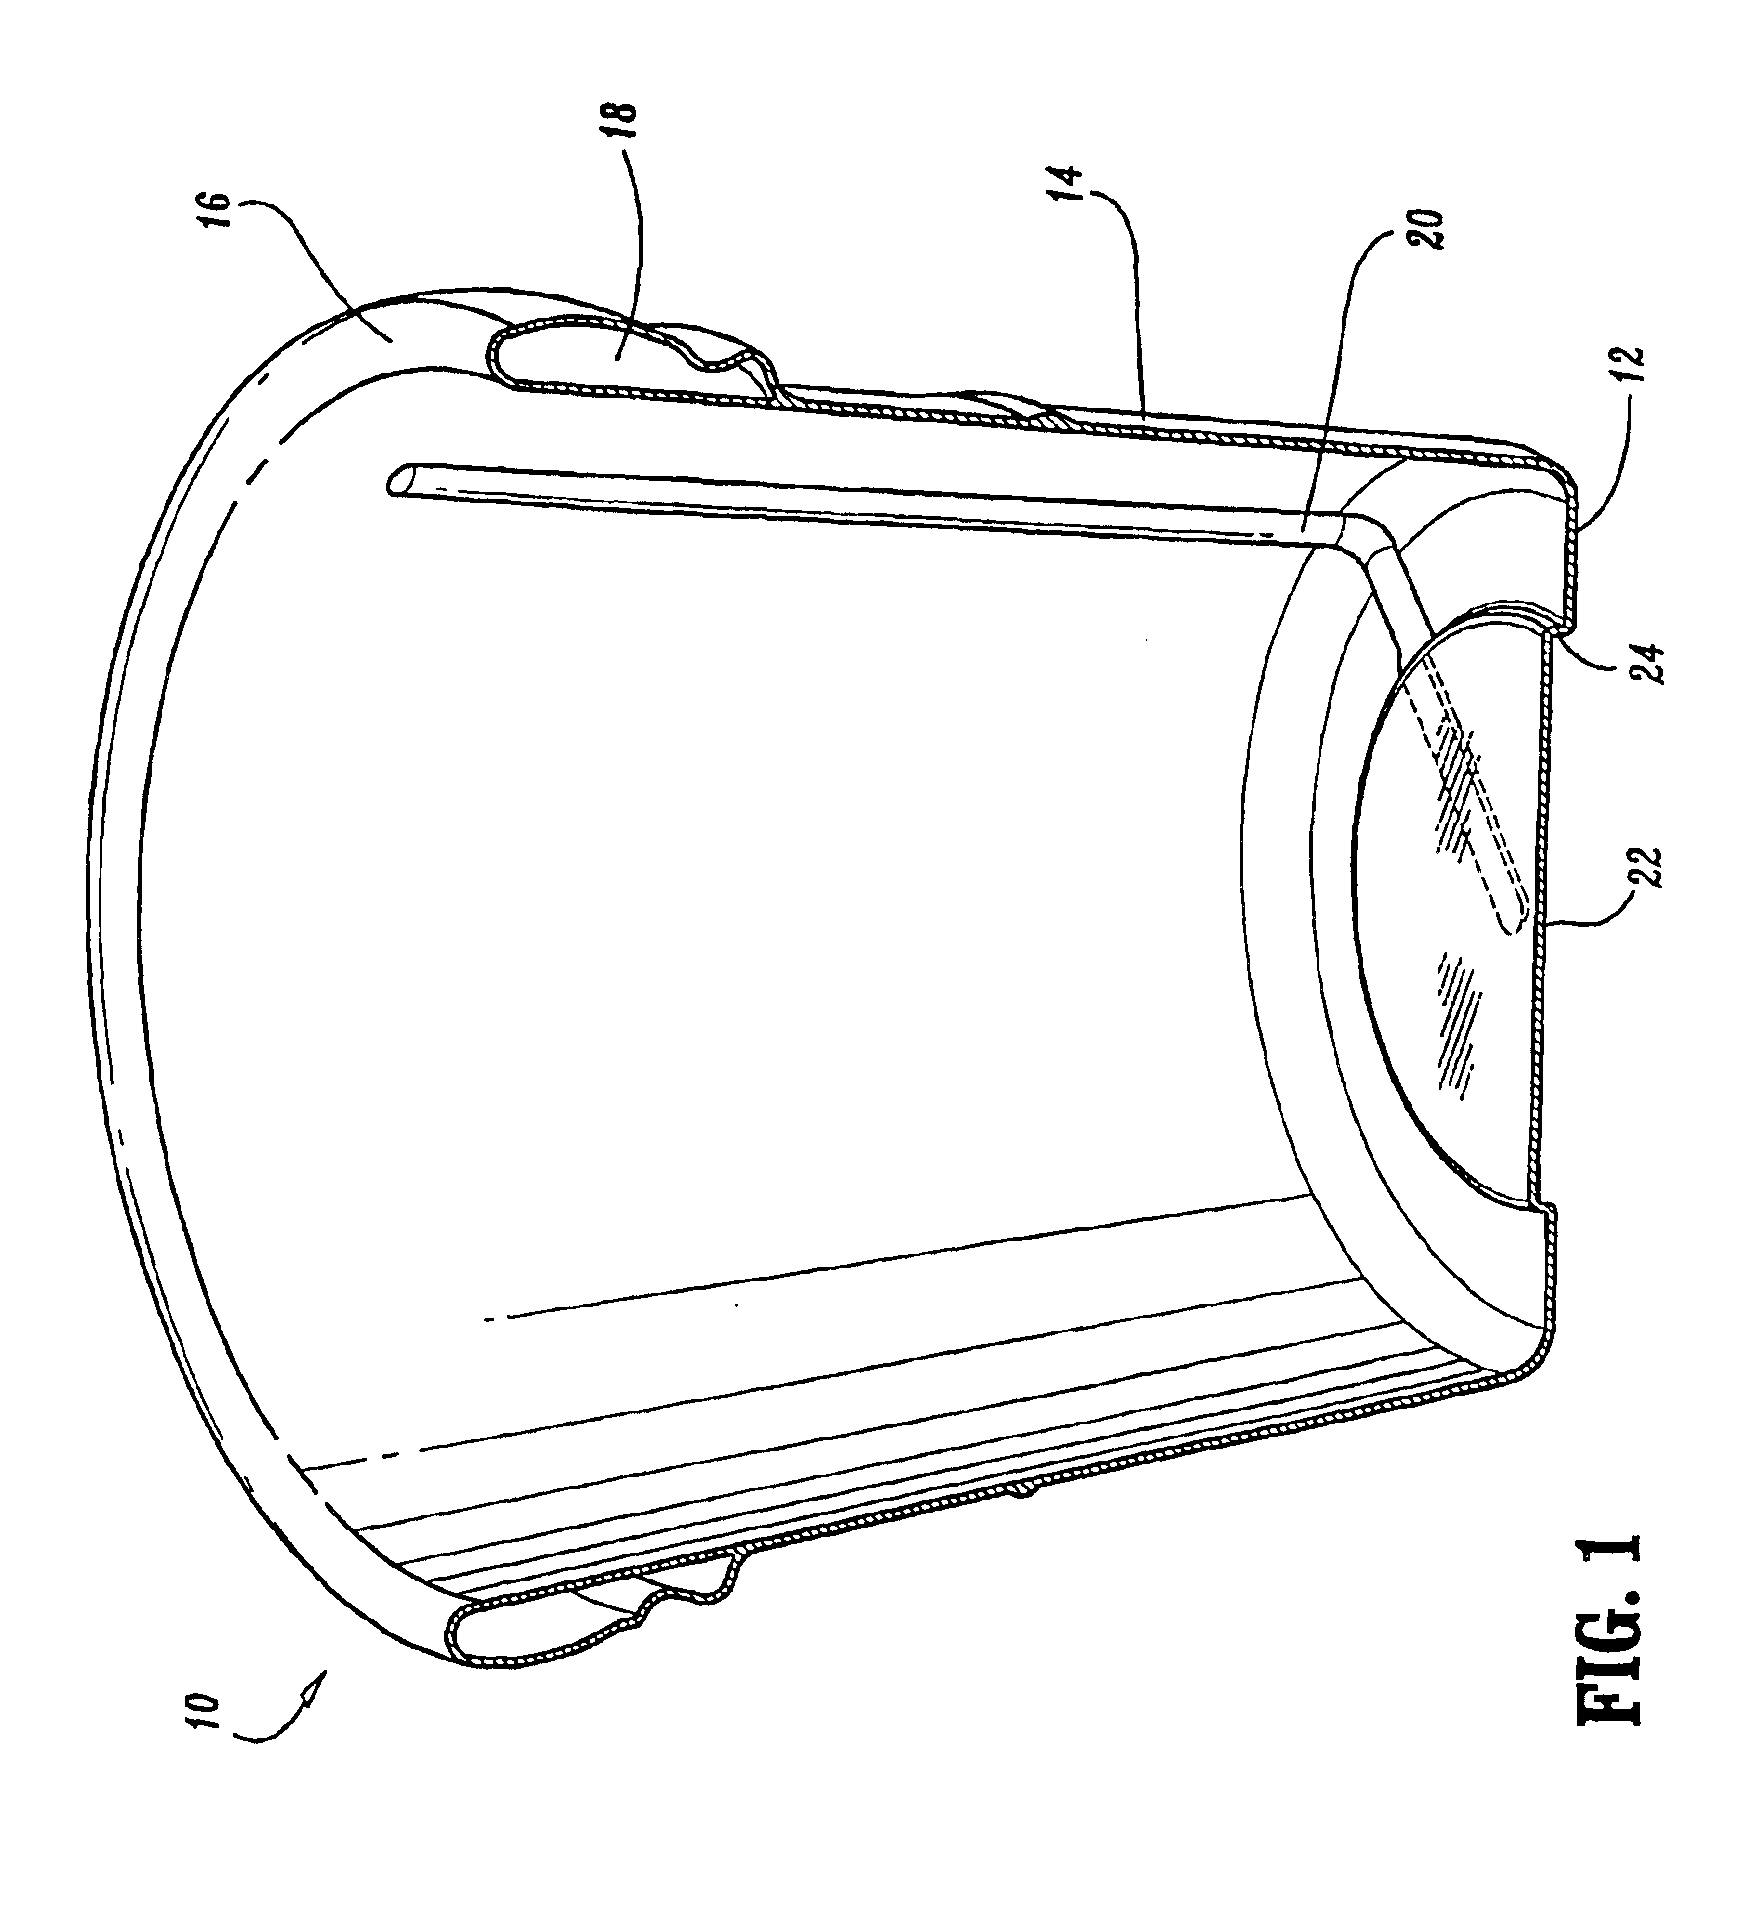 Molded article having hollow rim portion and process for producing articles